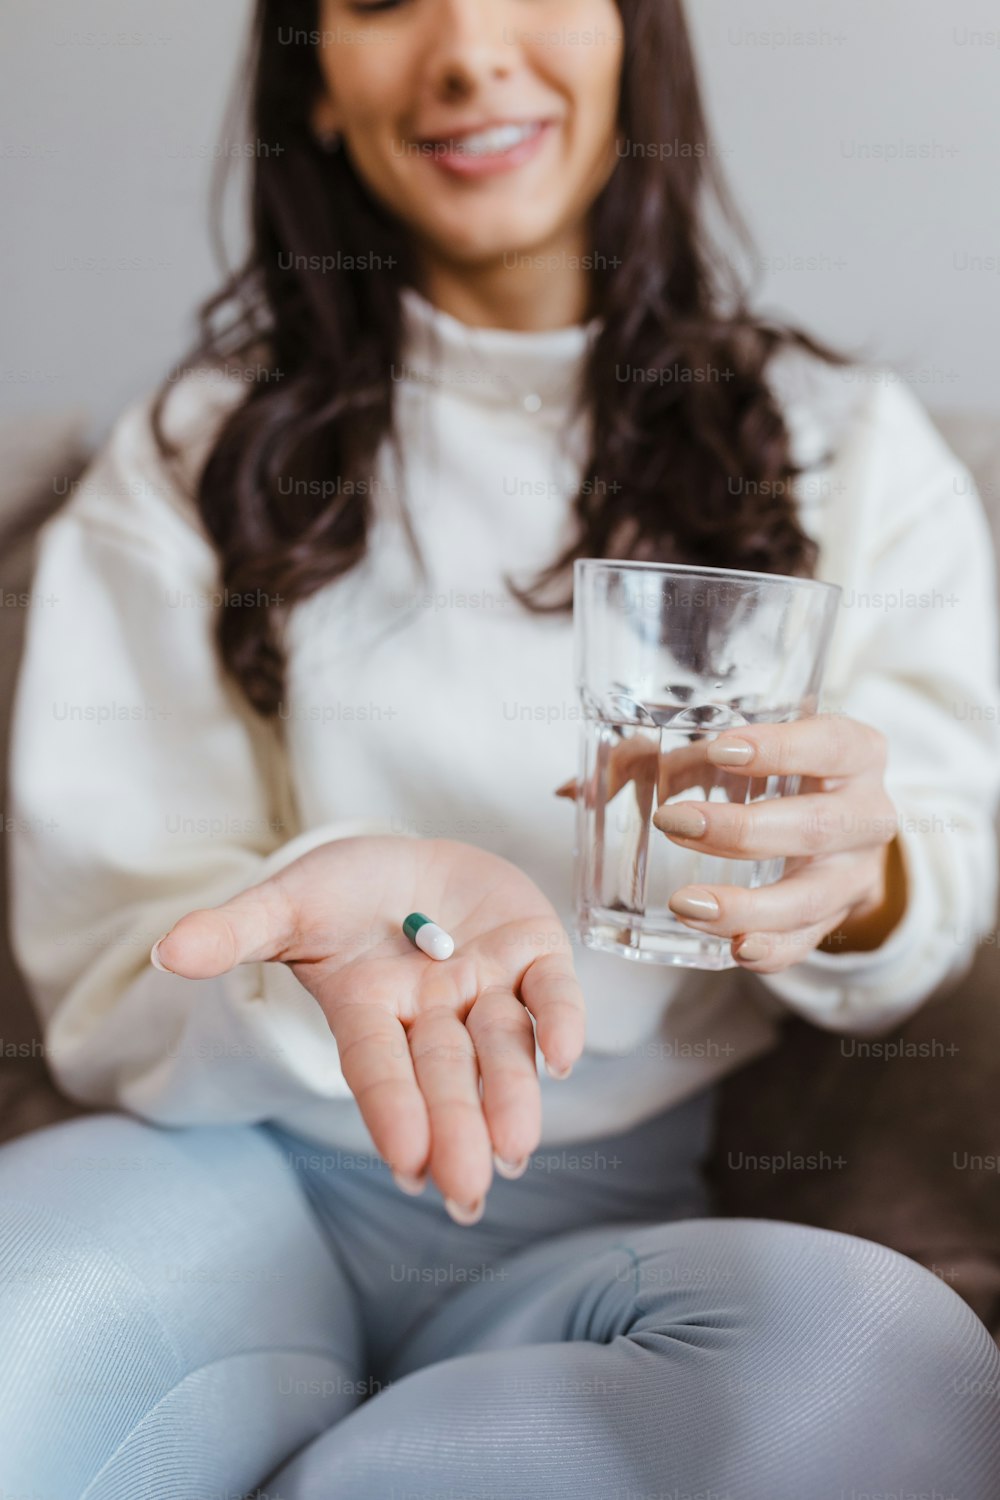 a woman sitting on a couch holding a glass of water